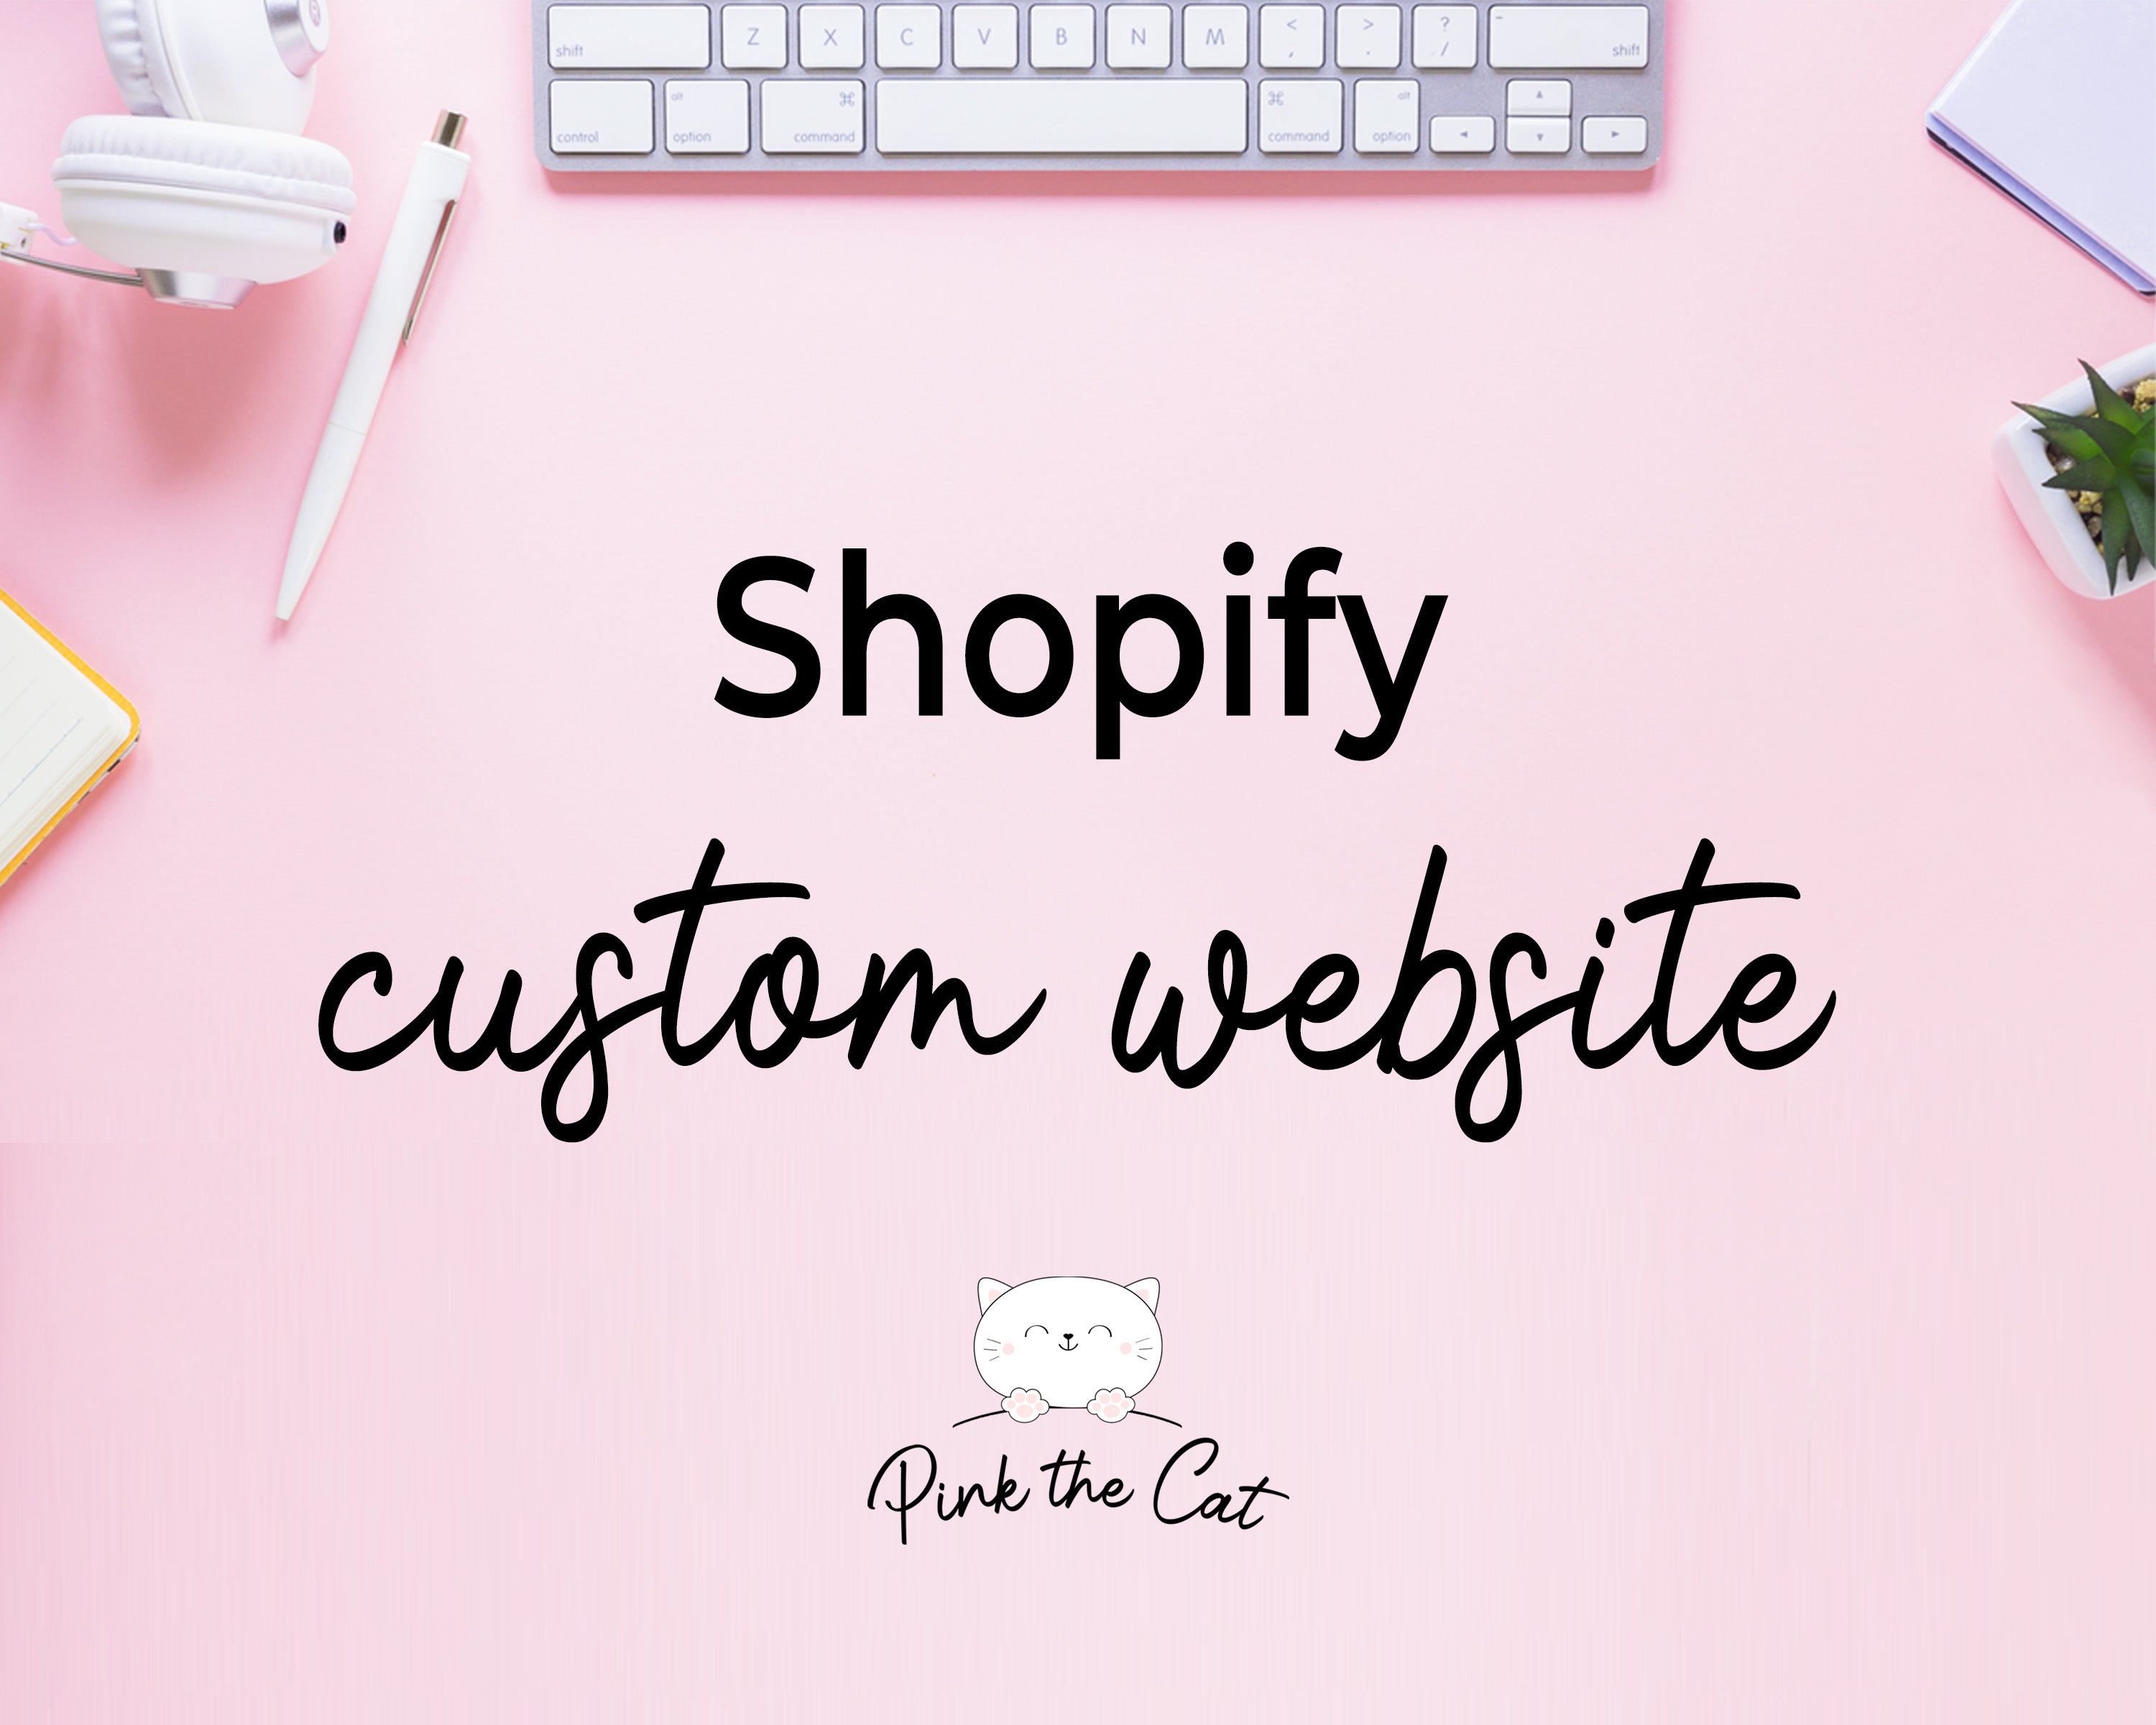 Custom shopify website SEO - Pluggins - 3mo Support